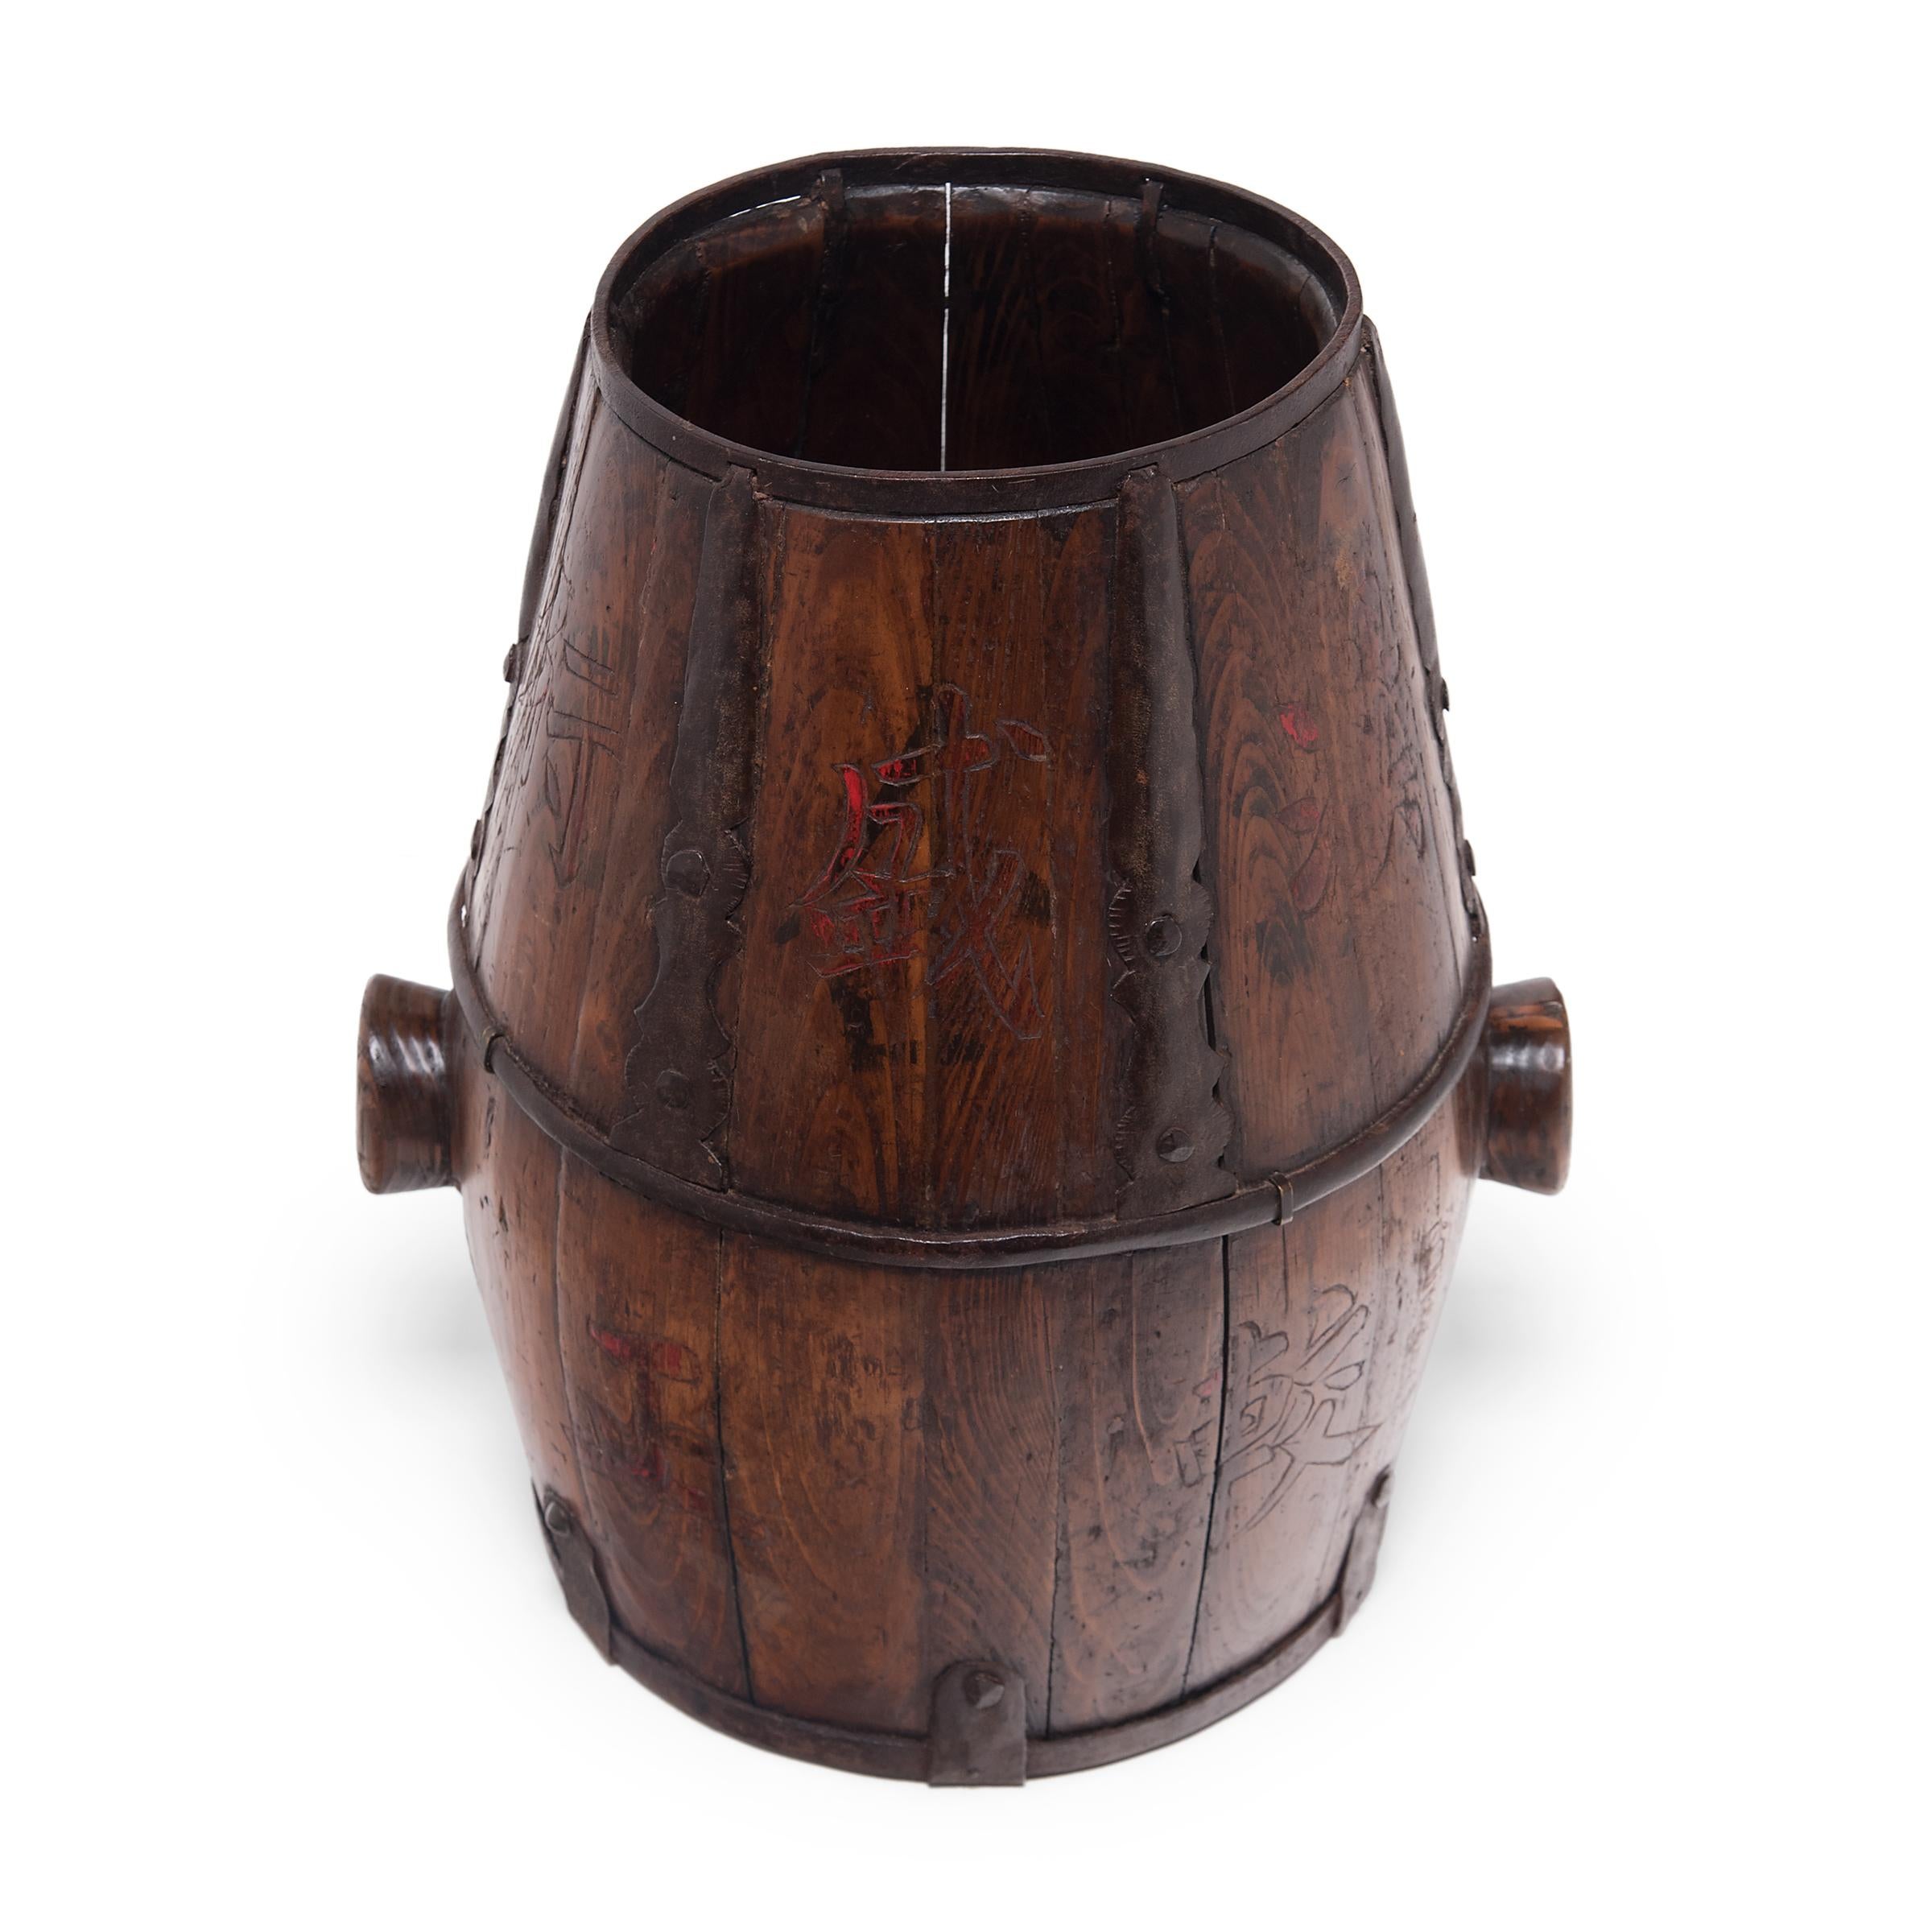 Carved Chinese Barrel-Form Grain Container, c. 1900